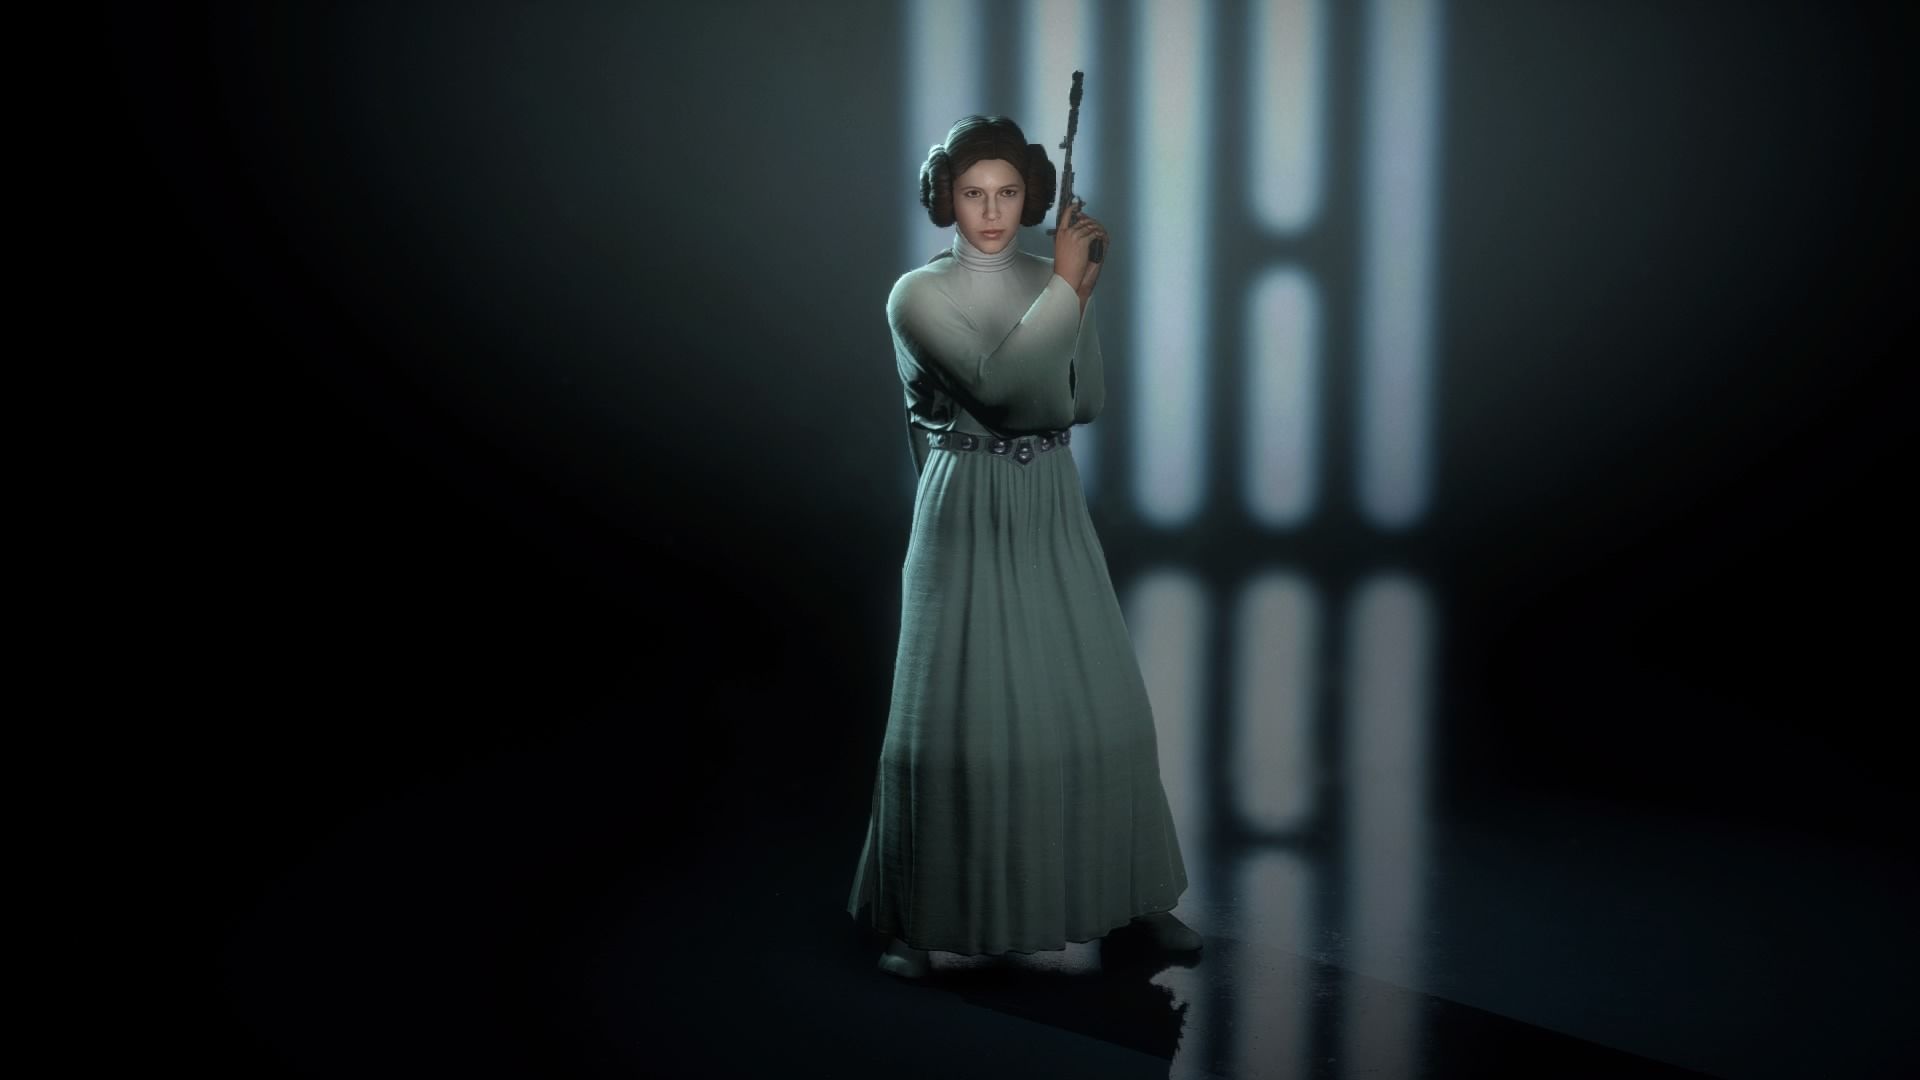 Star Wars Battlefront 2 Leia Skin Requirements Announced